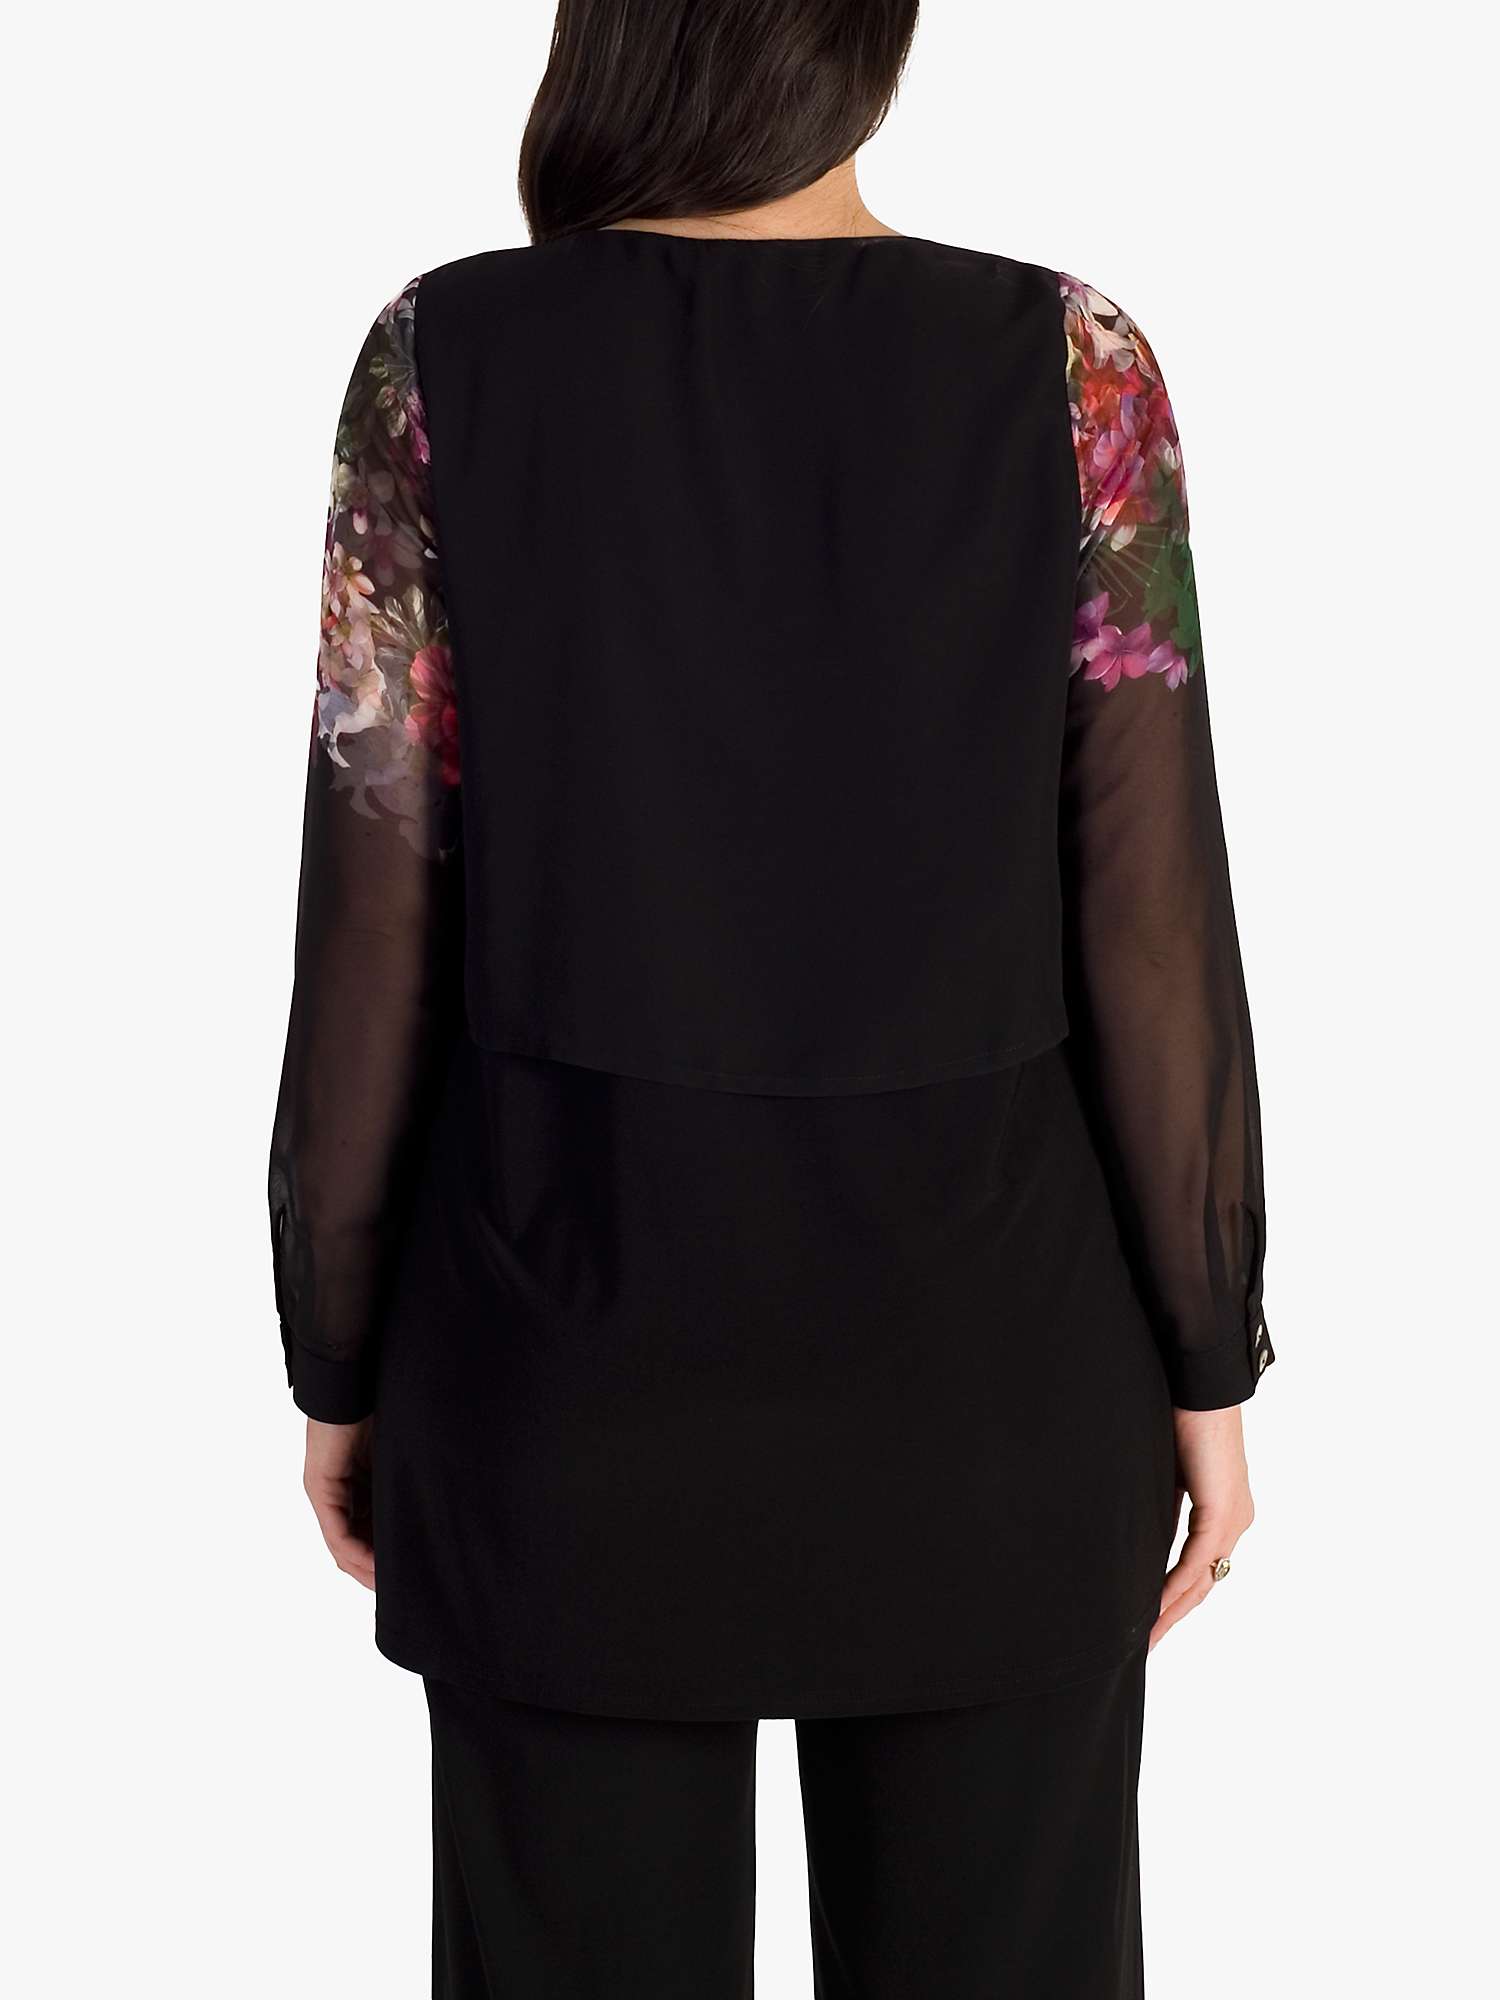 Buy chesca Wisteria Placement Print Double Layered Top, Black/Grape Online at johnlewis.com